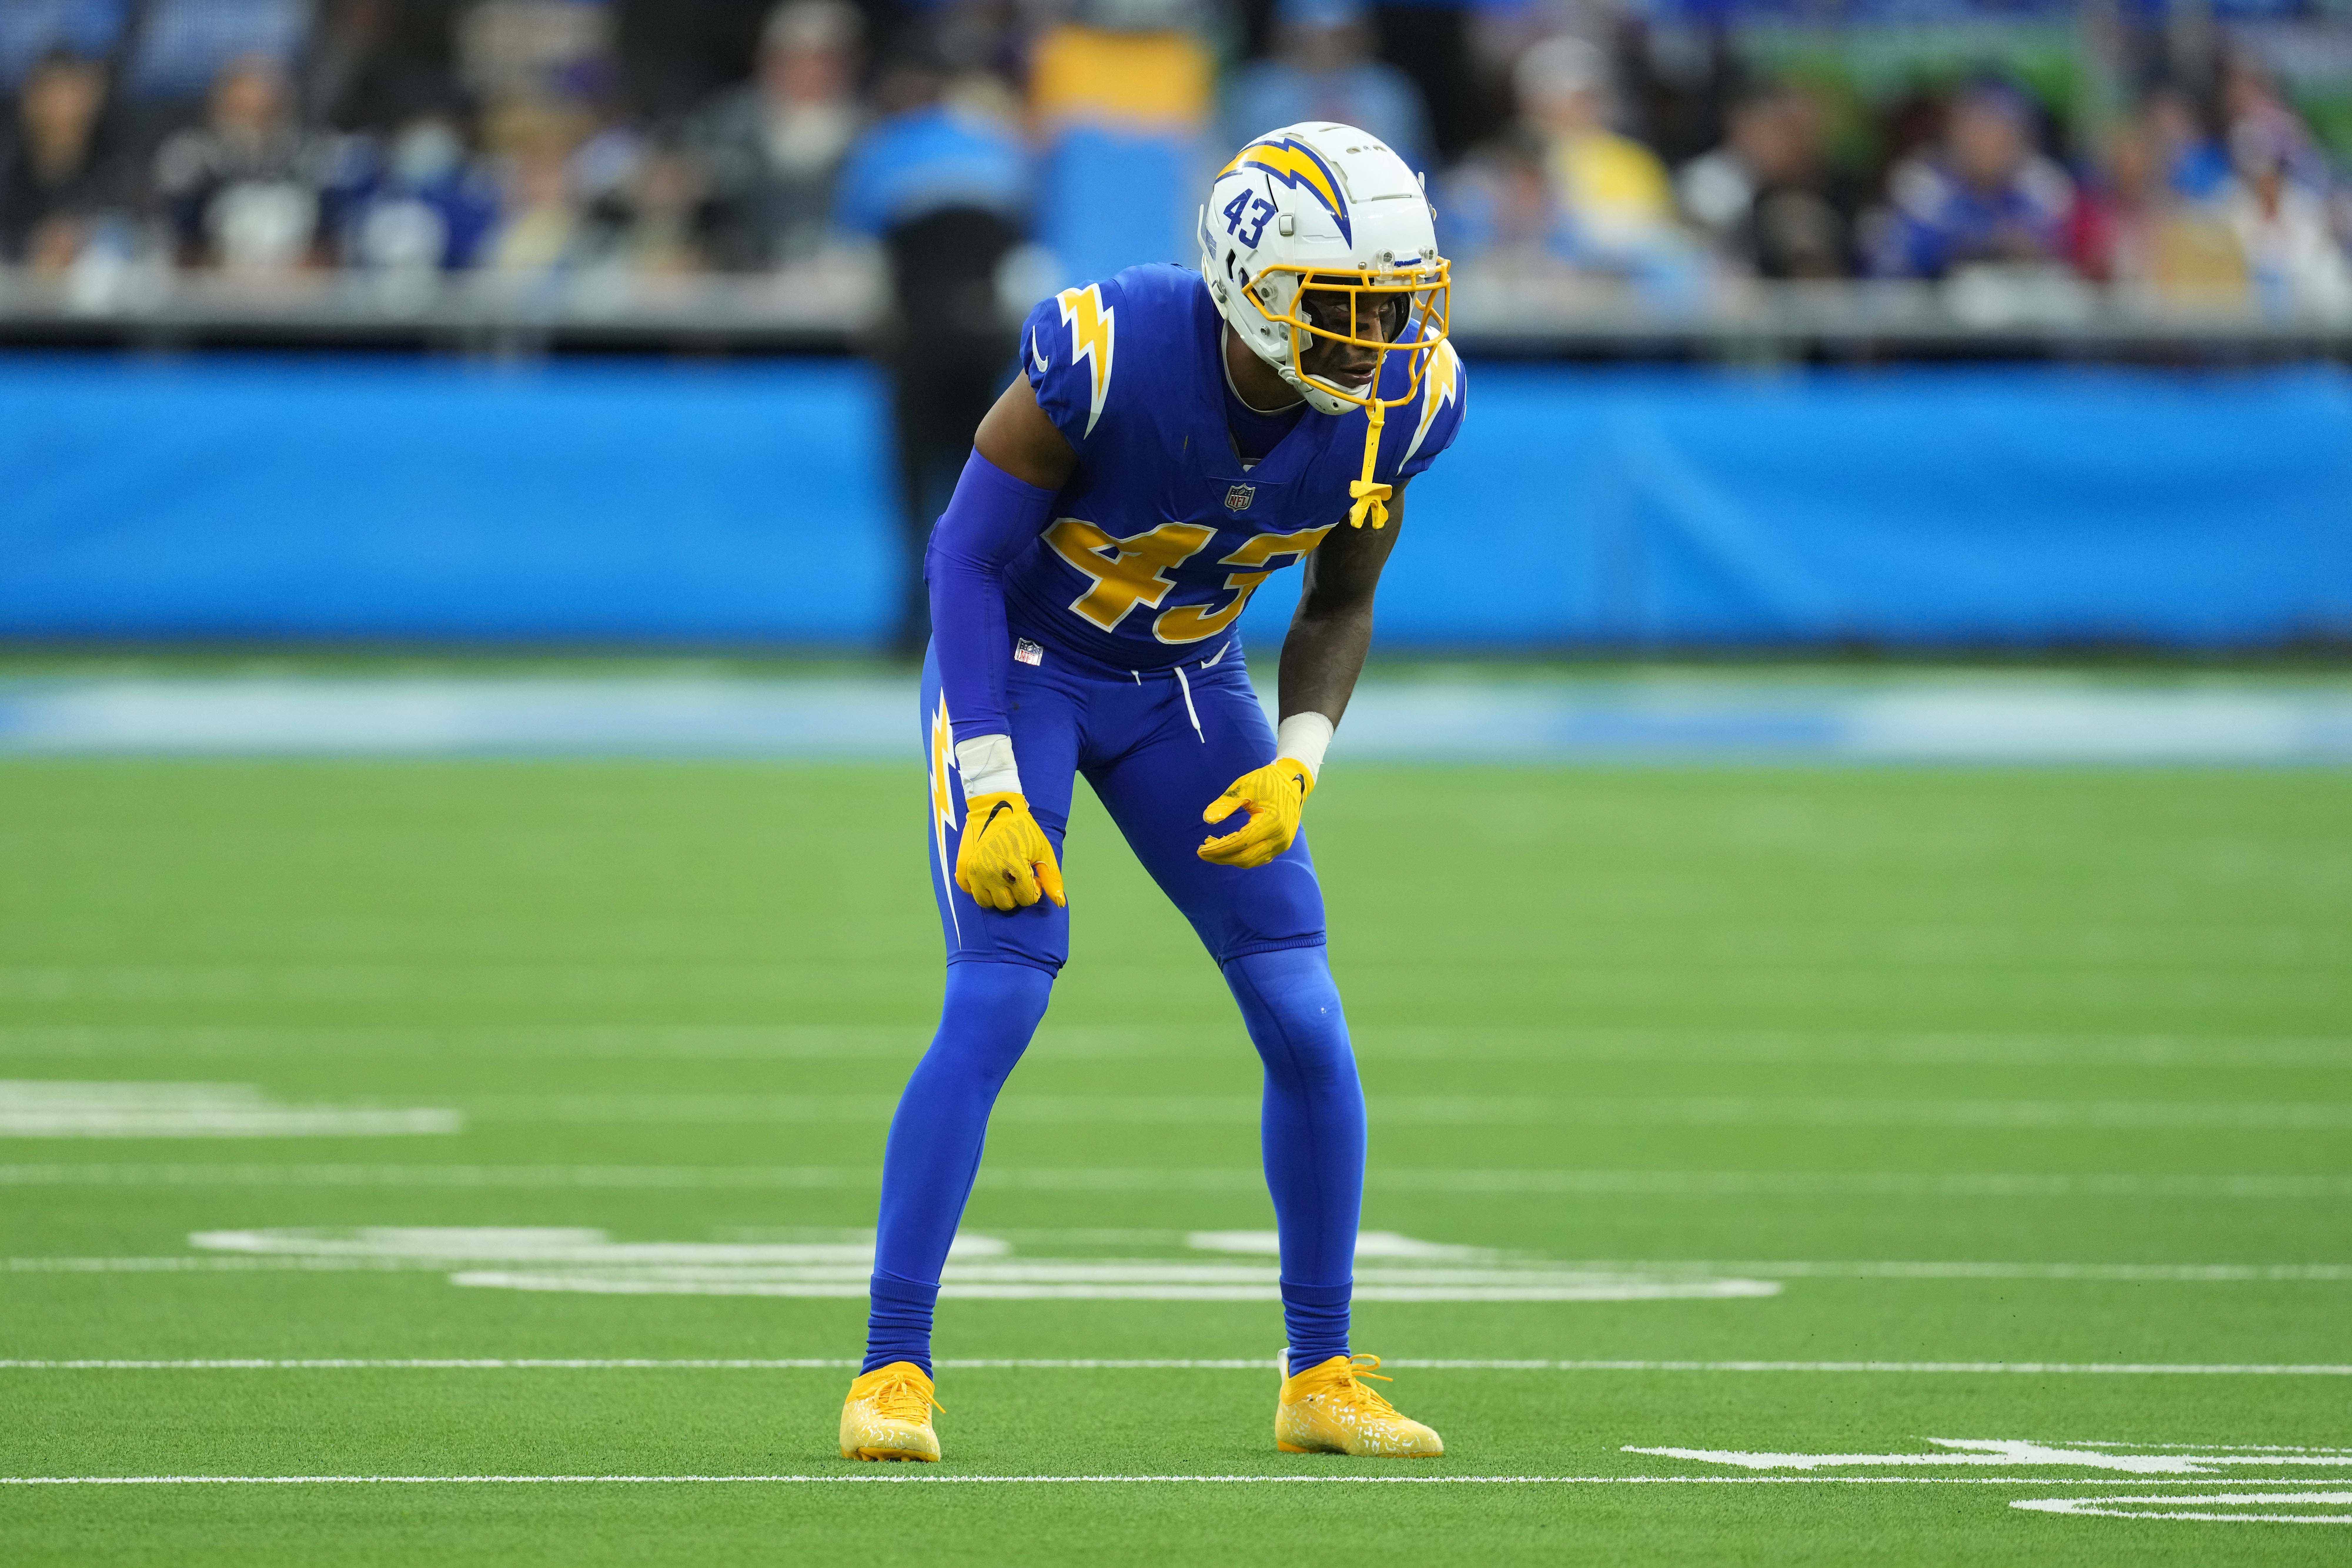 Dec 12, 2021; Inglewood, California, USA; Los Angeles Chargers cornerback Michael Davis (43) during the game against the New York Giants at SoFi Stadium. Mandatory Credit: Kirby Lee-USA TODAY Sports